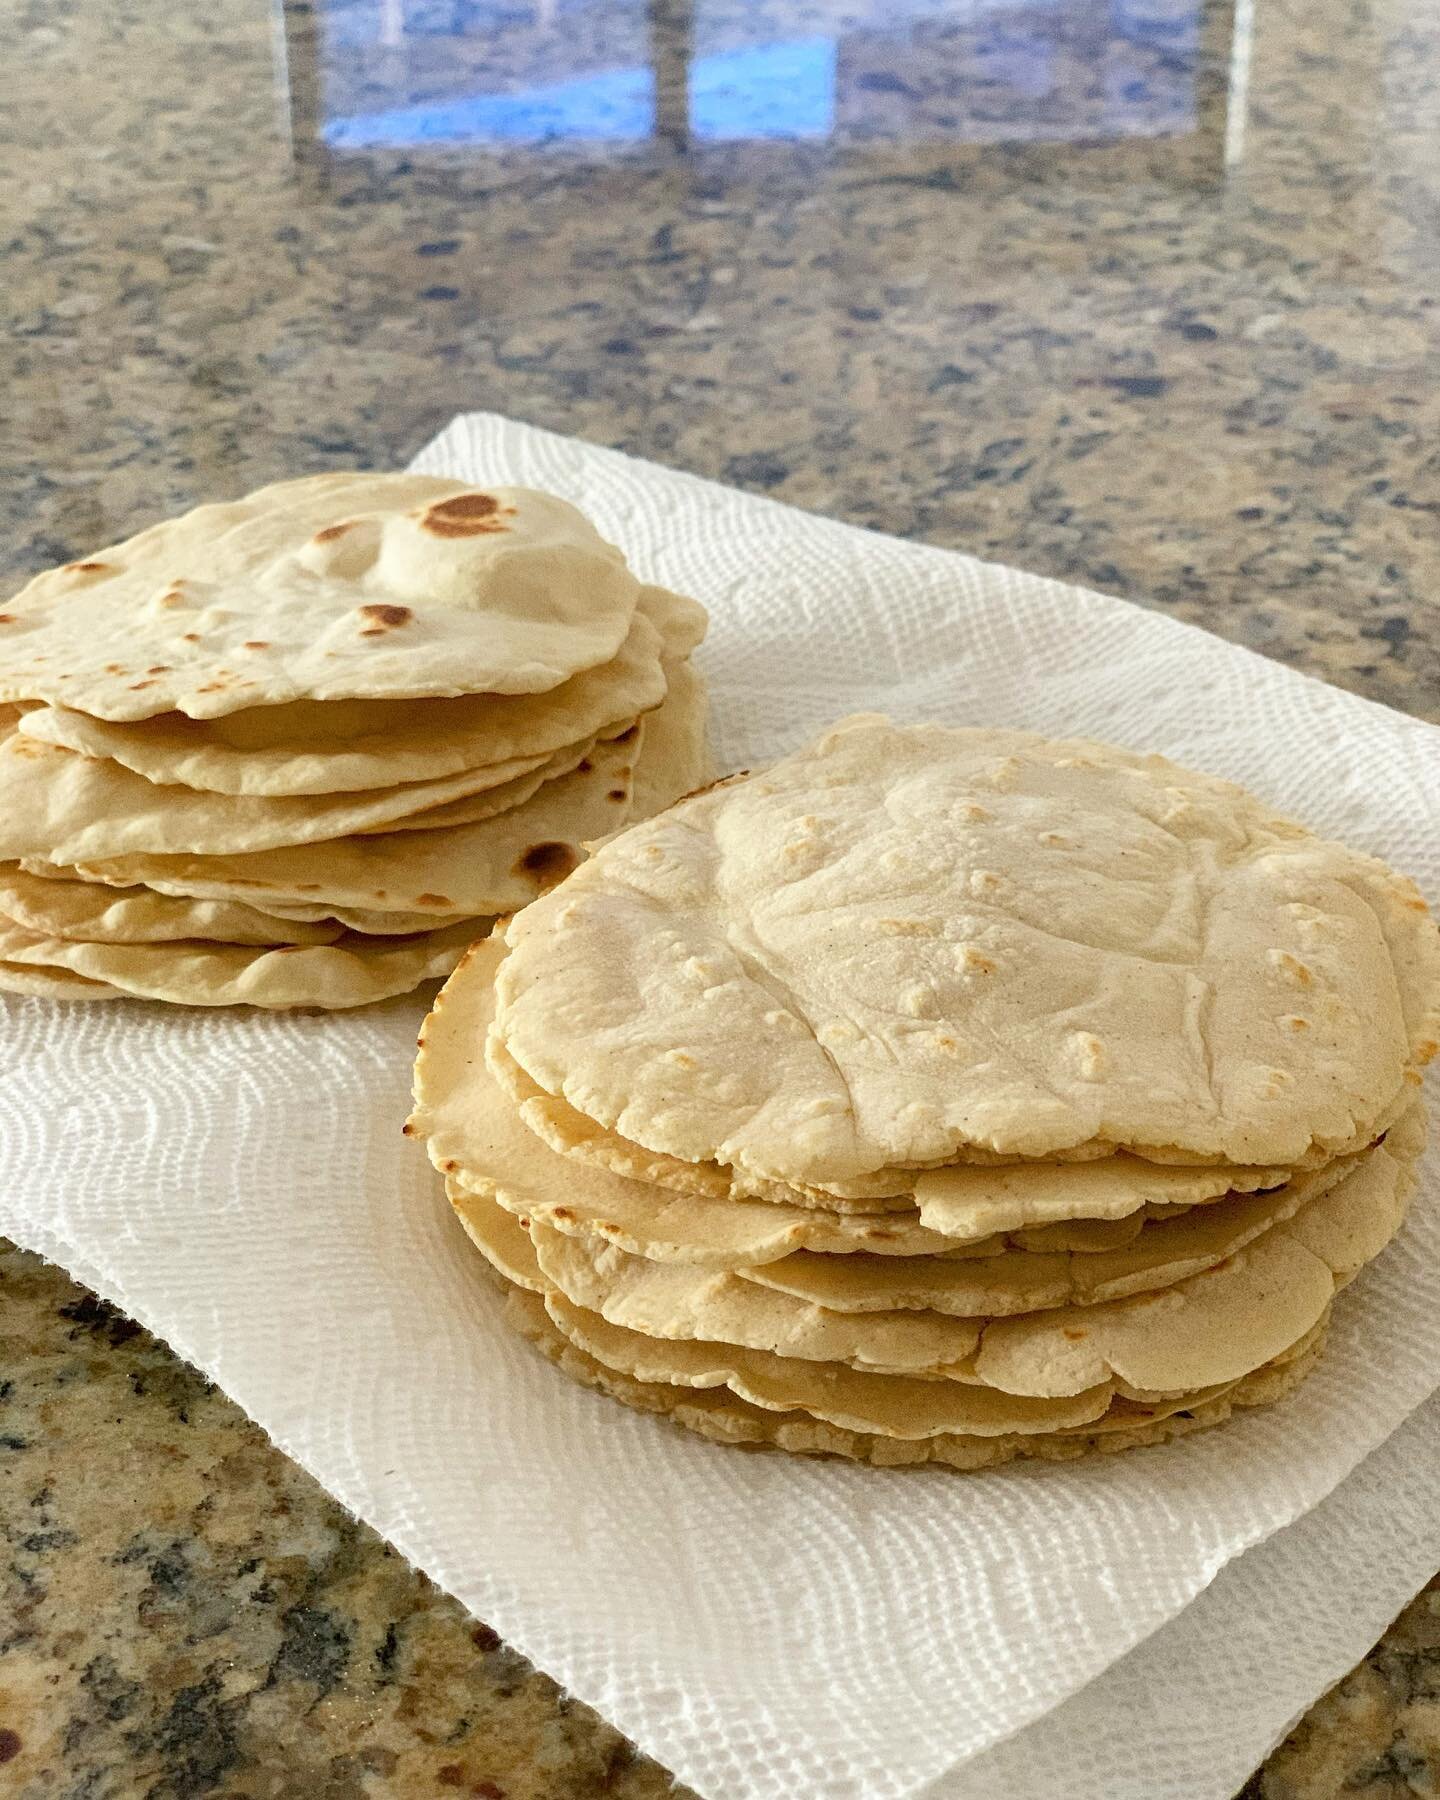 Homemade flour &amp; corn tortillas 😋 so delicious yet very simple and easy to achieve!